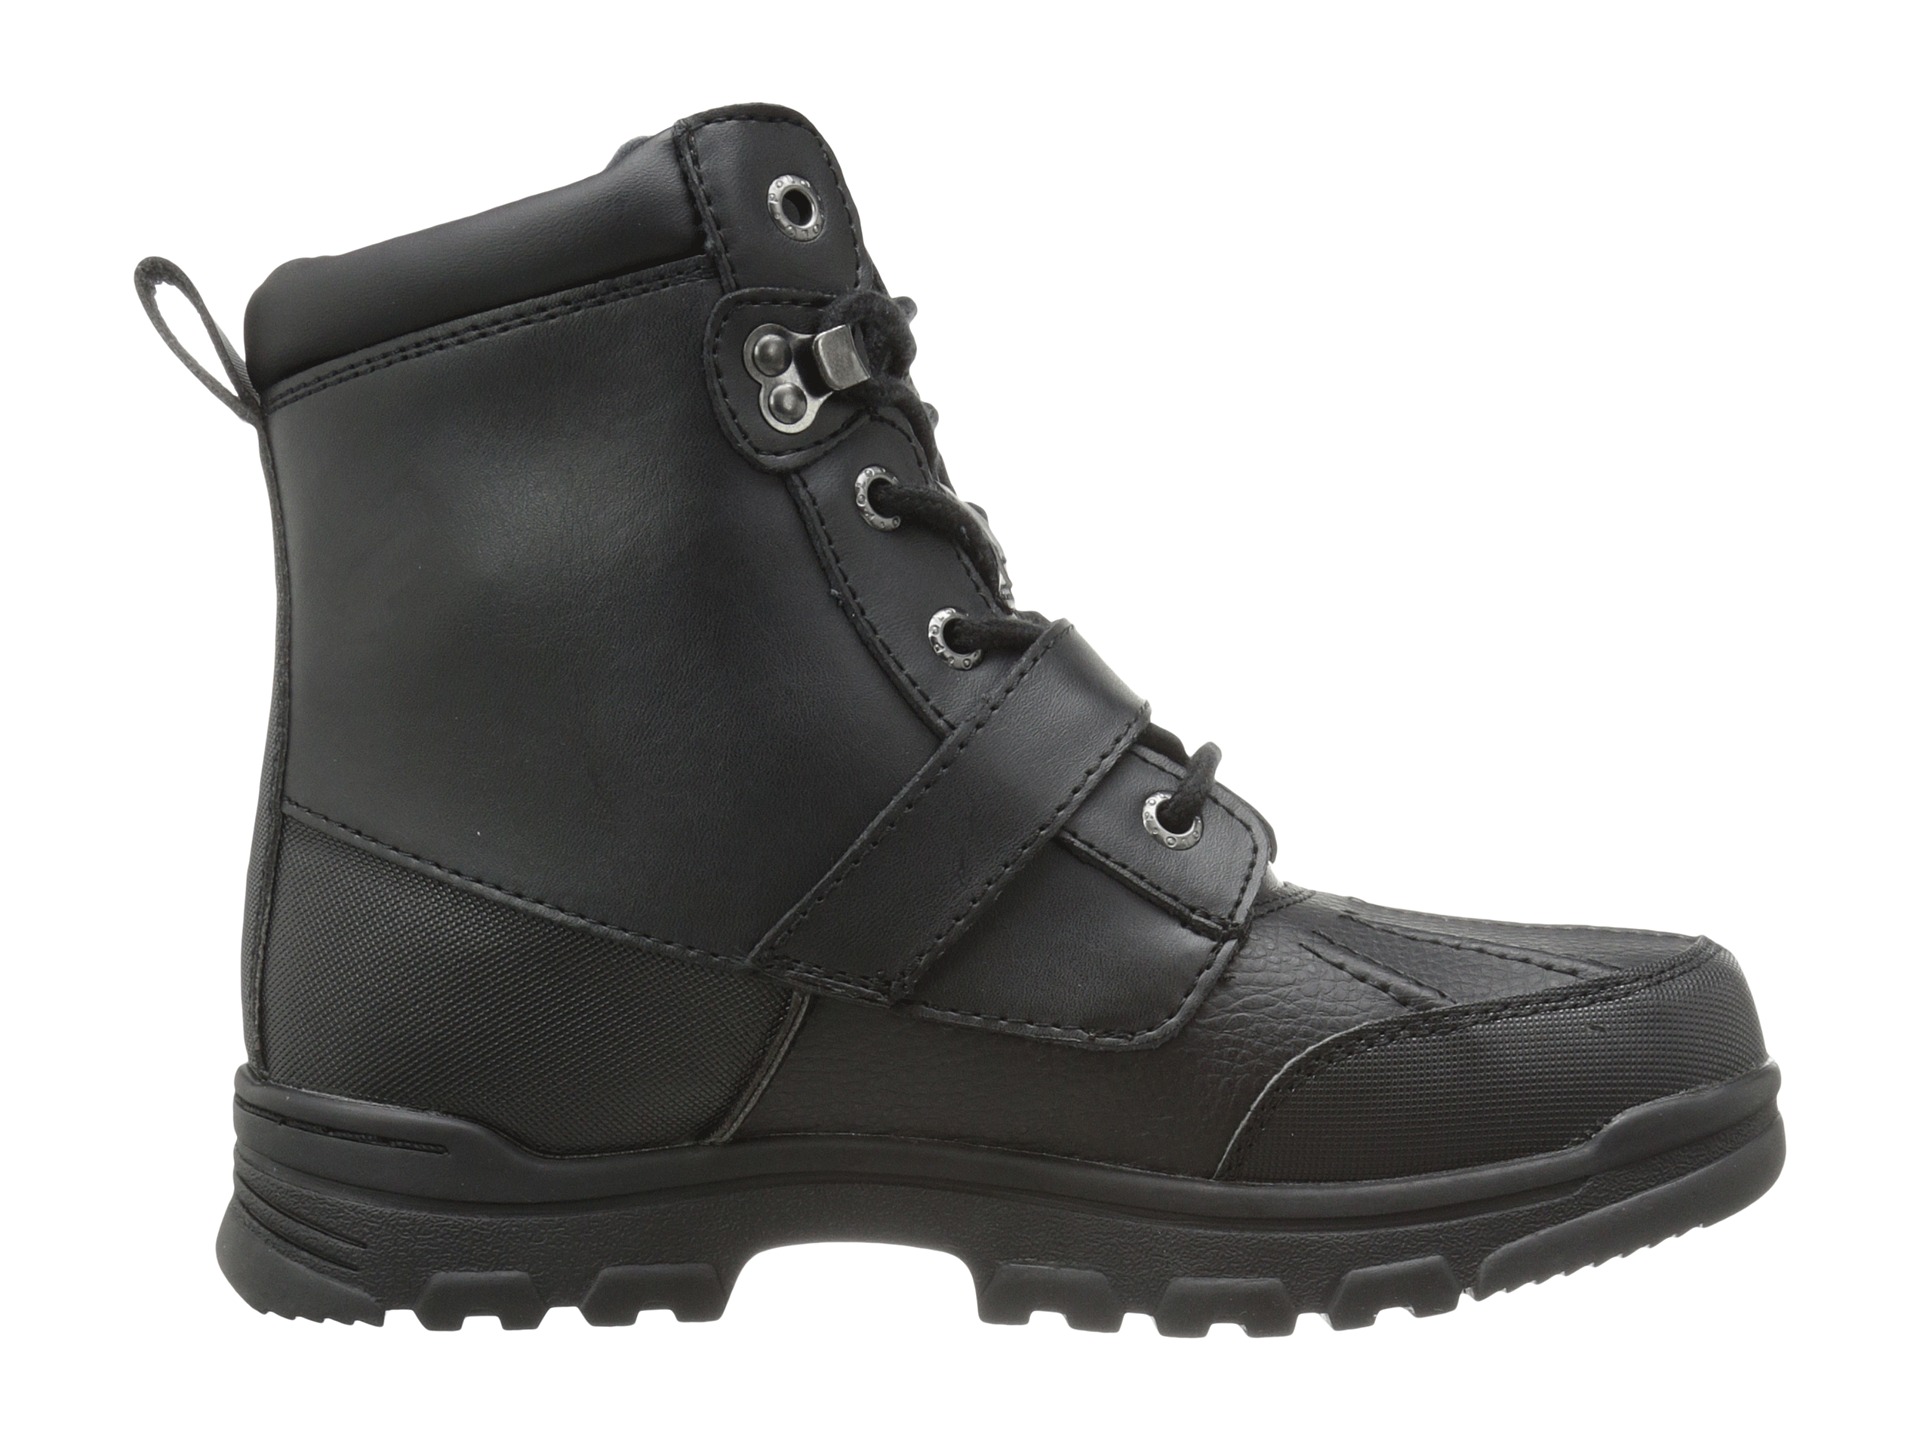 Polo Ralph Lauren Kids Colbey Boot FT14 (Big Kid) at Zappos.com